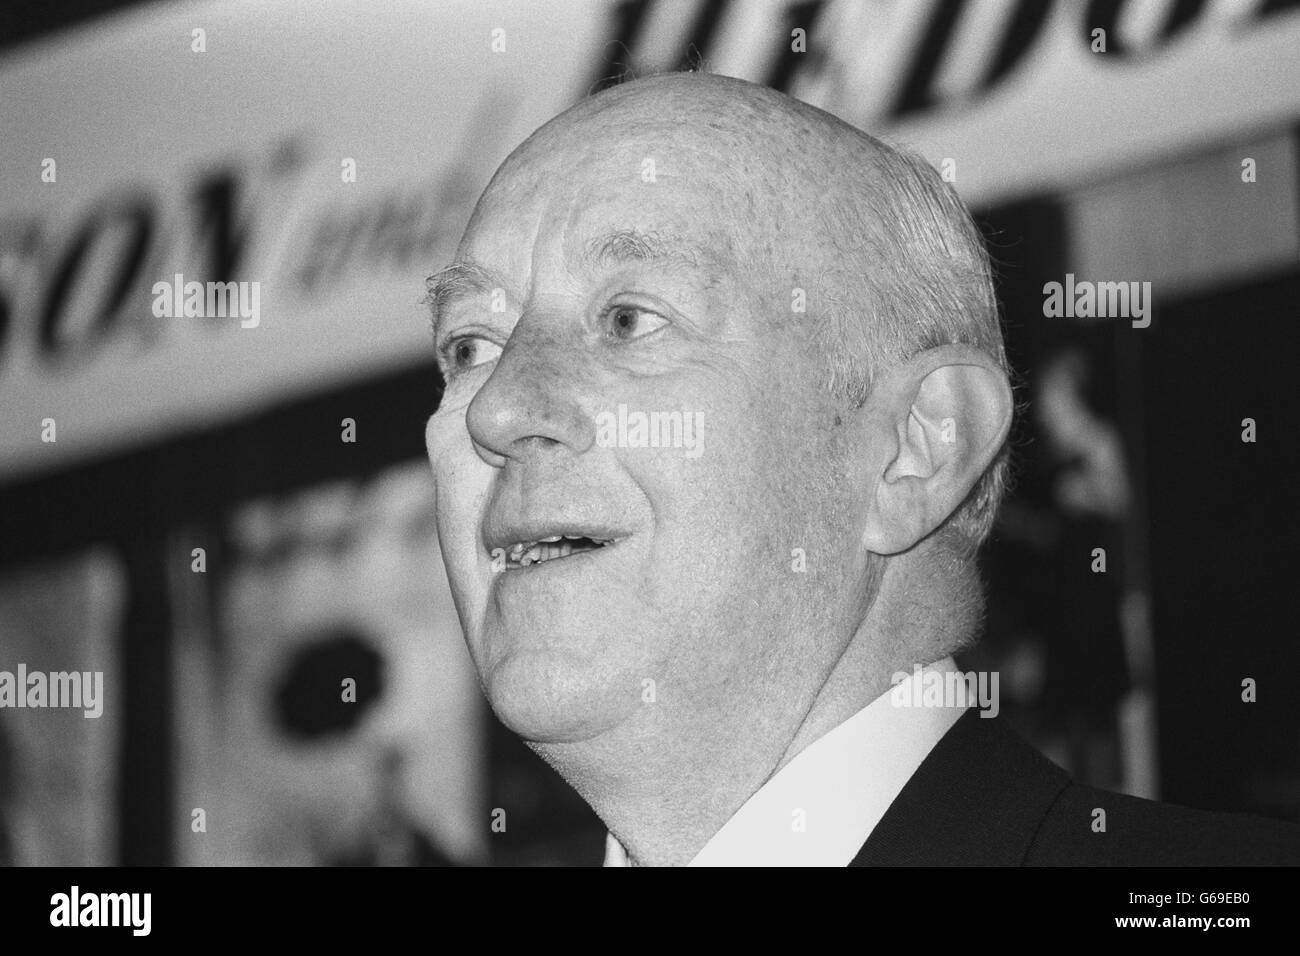 Entertainment - Actor Sir Alec Guinness - London Stock Photo